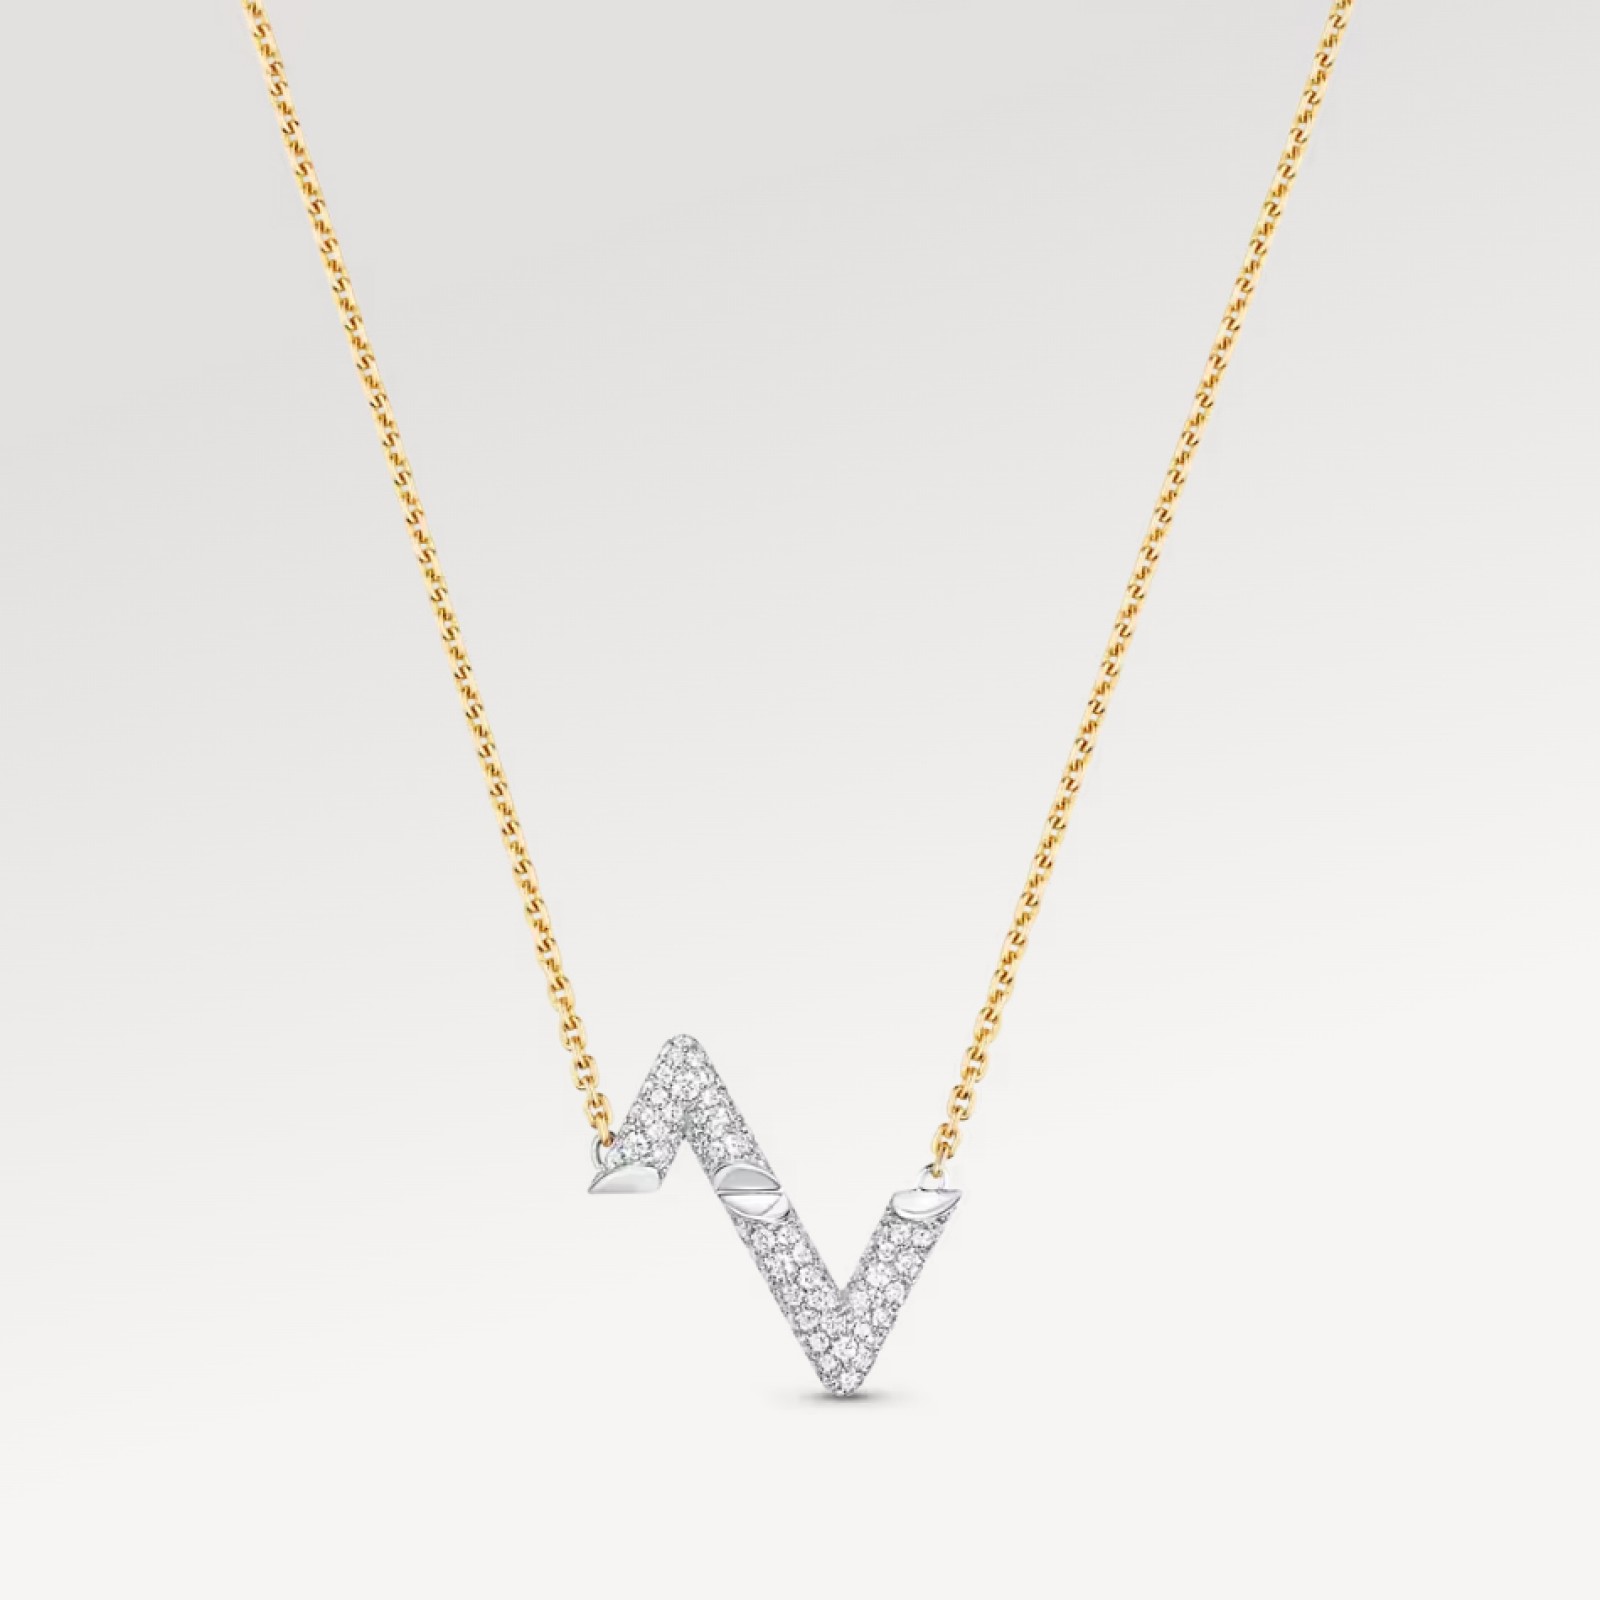 LV Volt Upside Down Pendant, Yellow Gold, White Gold And Diamonds